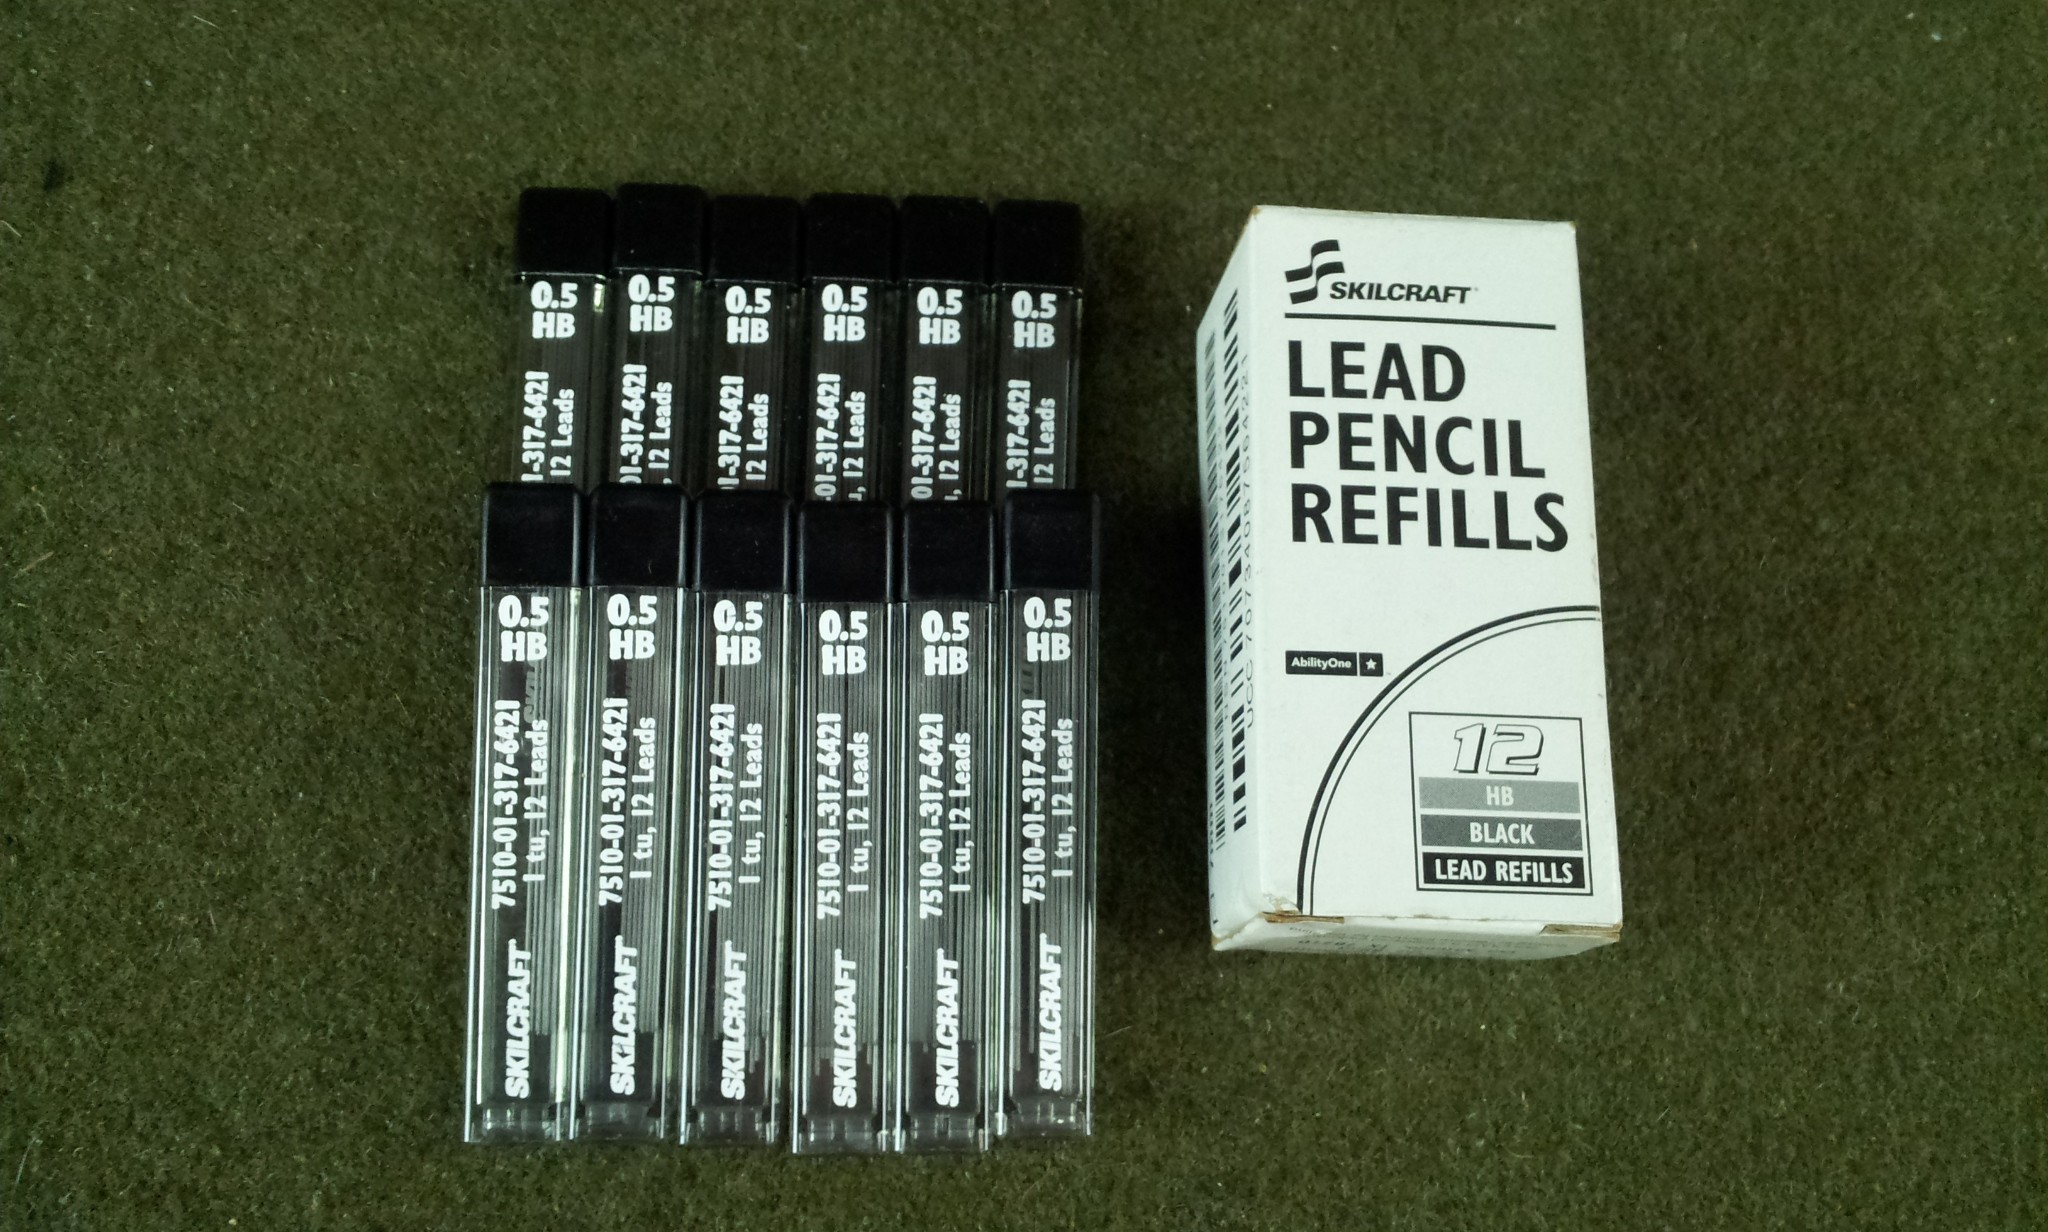 0.5 HB Polymer Lead Pencil Refills 12 Tubes of 12 